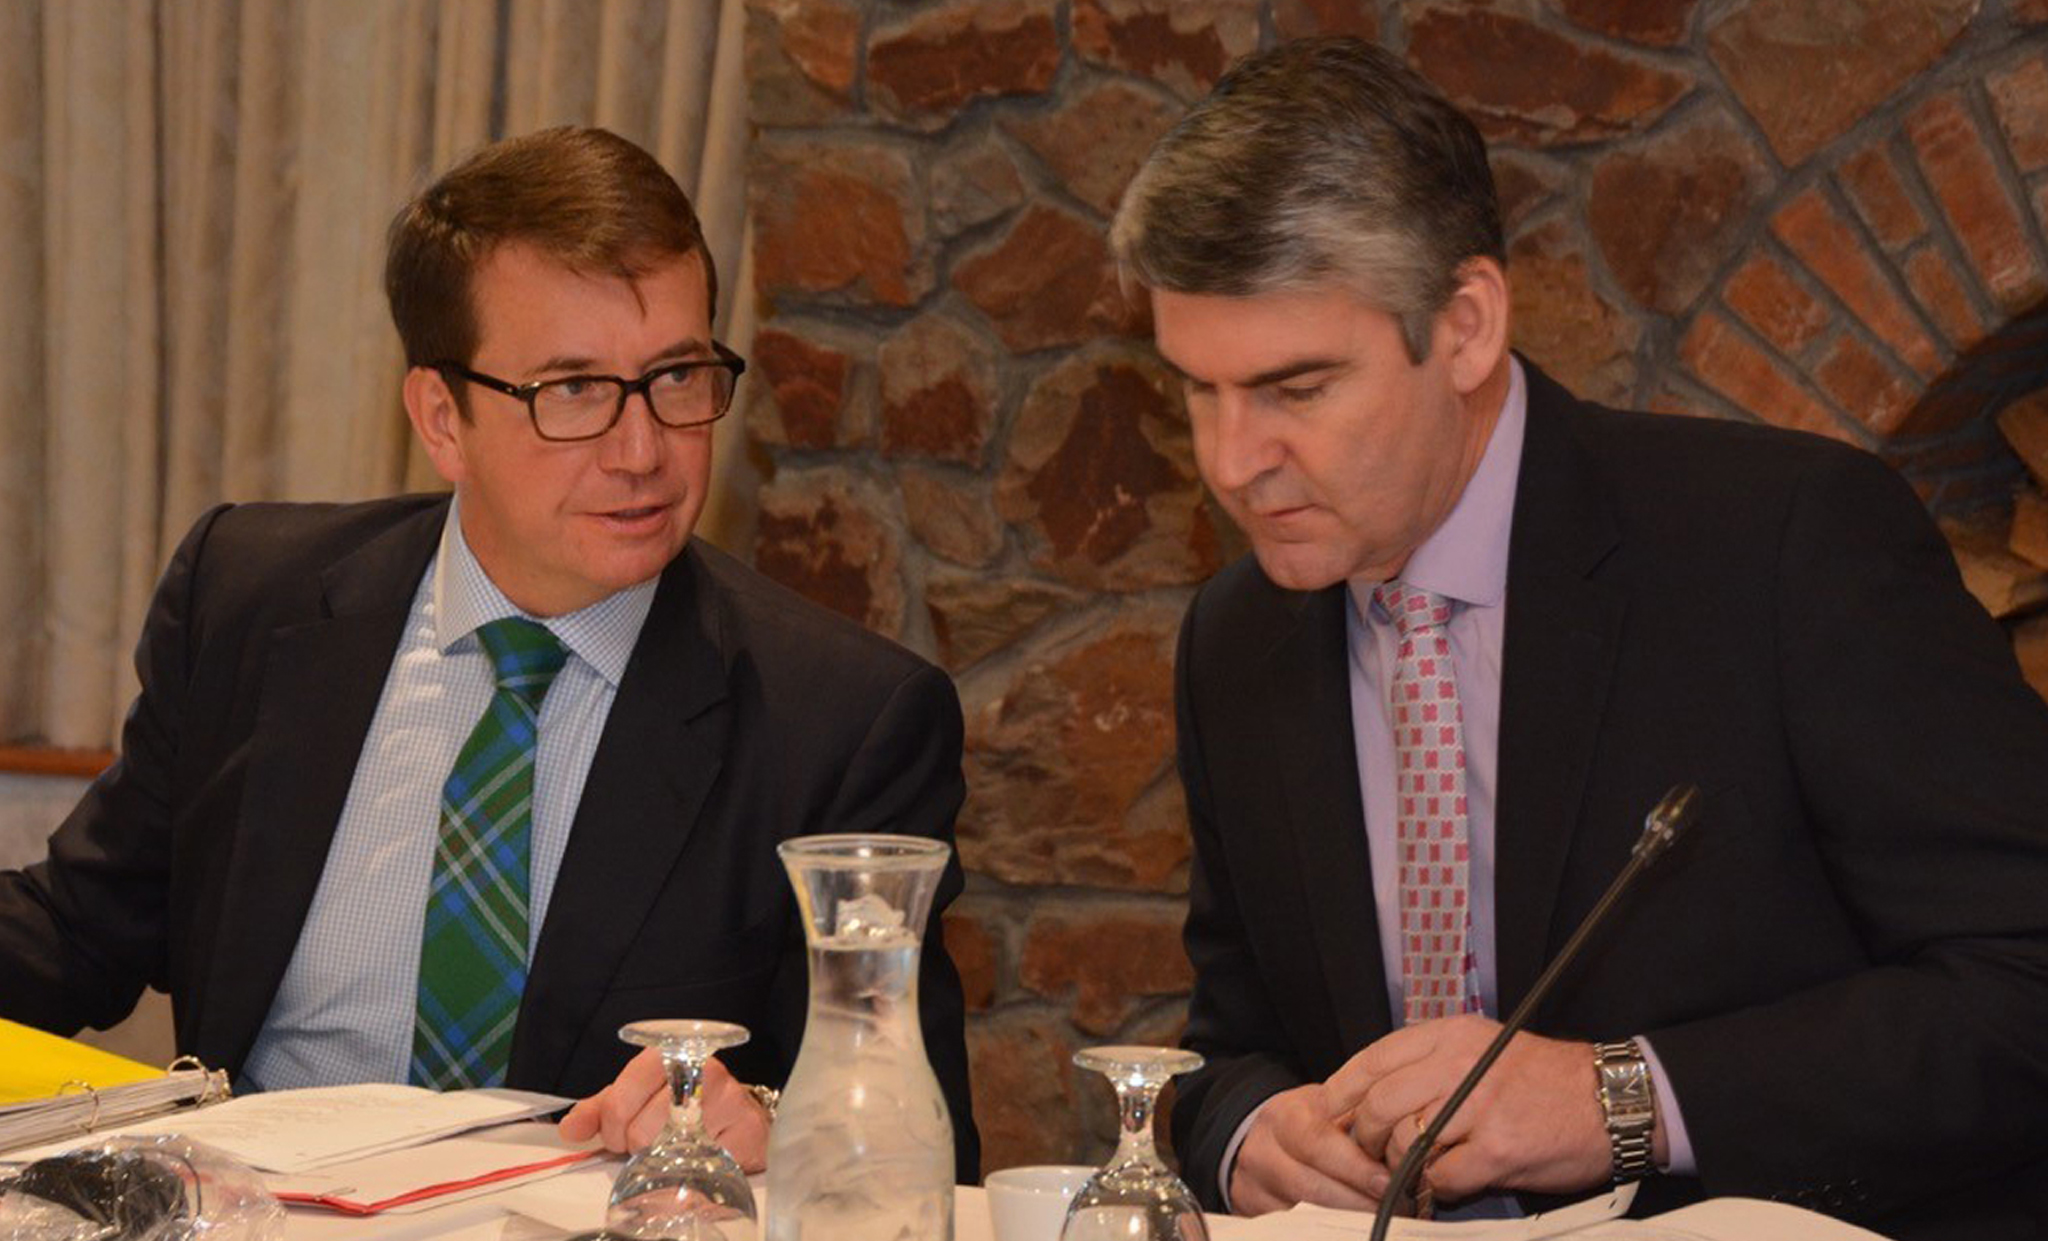 January 27, 2017 - The Honourable Scott Brison, President of the Treasury Board (left) and the Honourable Stephen McNeil, Premier of Nova Scotia, discuss progress on the Atlantic Growth Strategy.